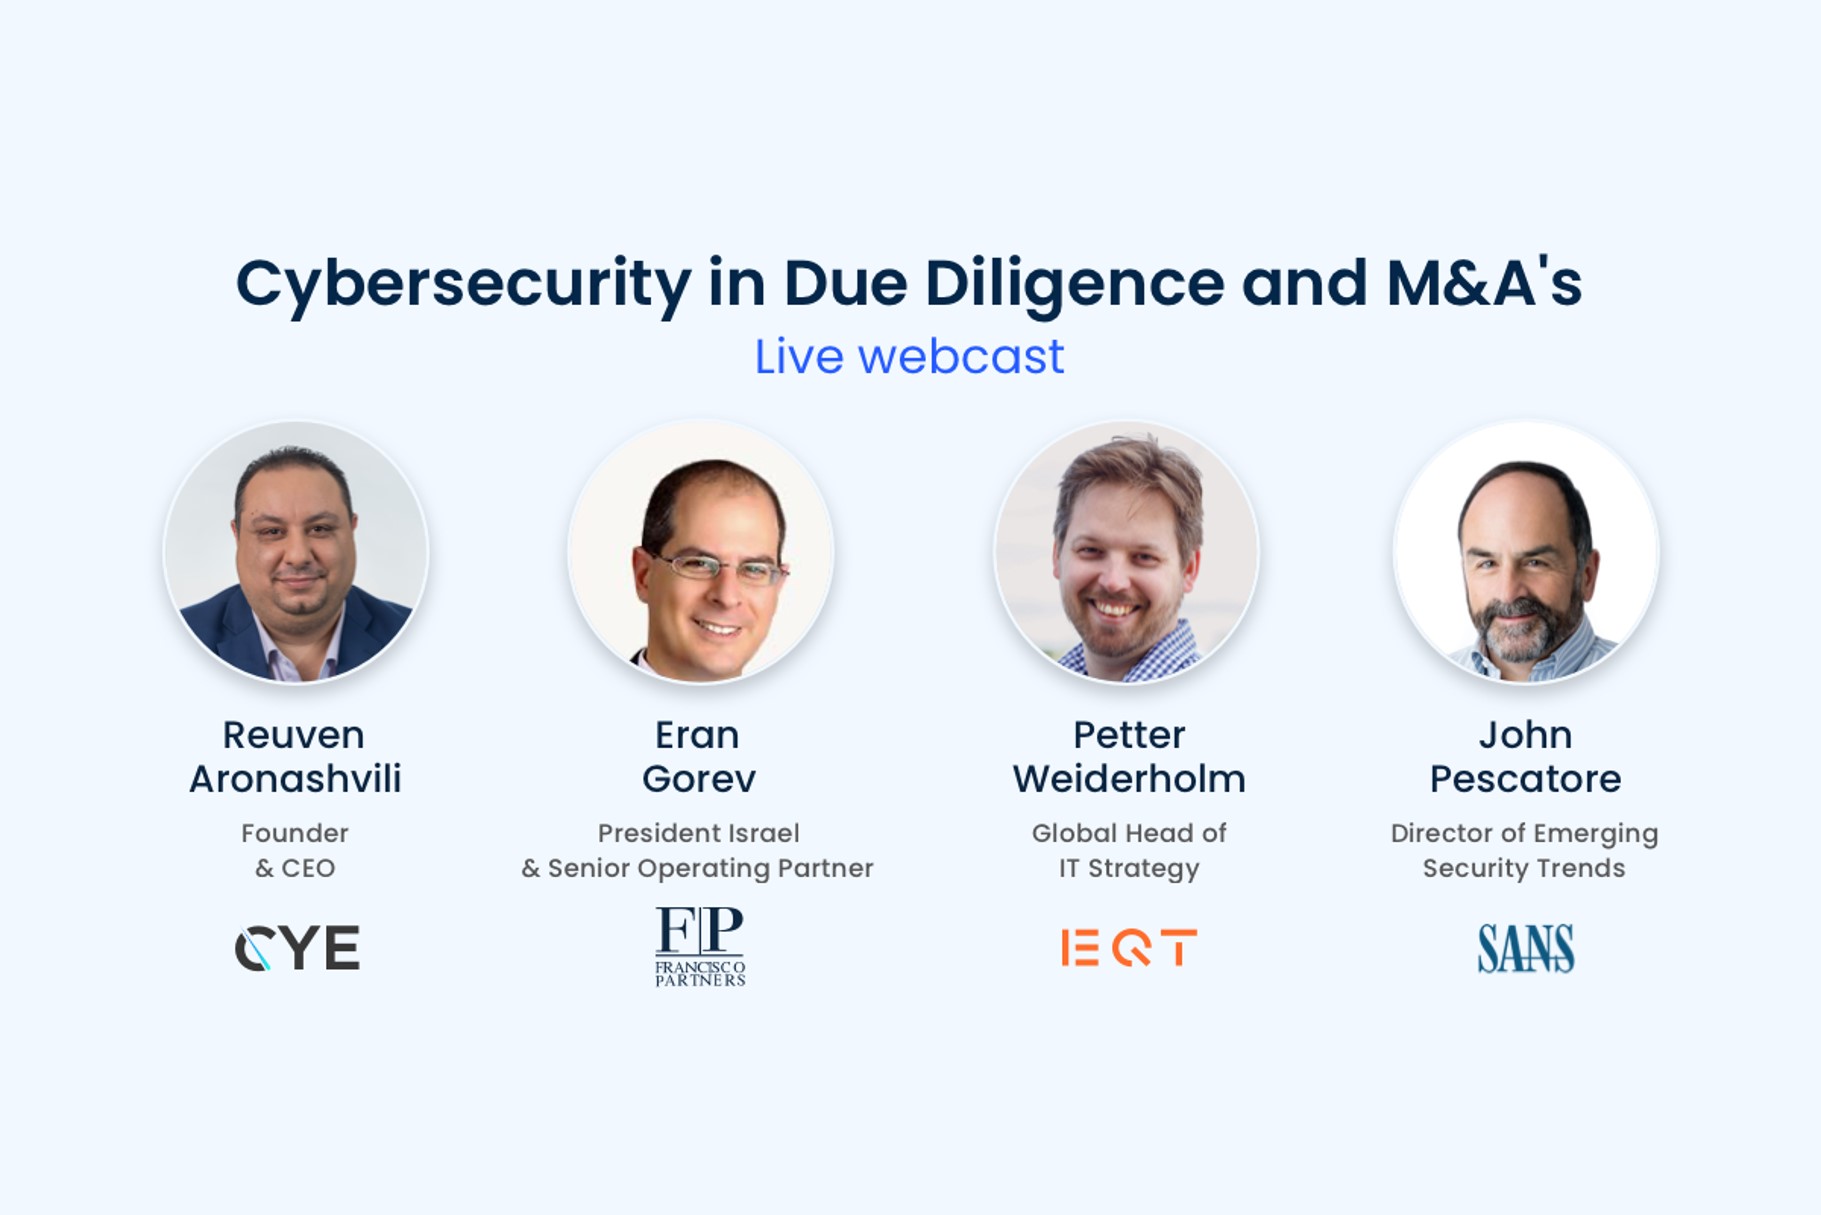 How to Effectively Speak About Cybersecurity with Your Board